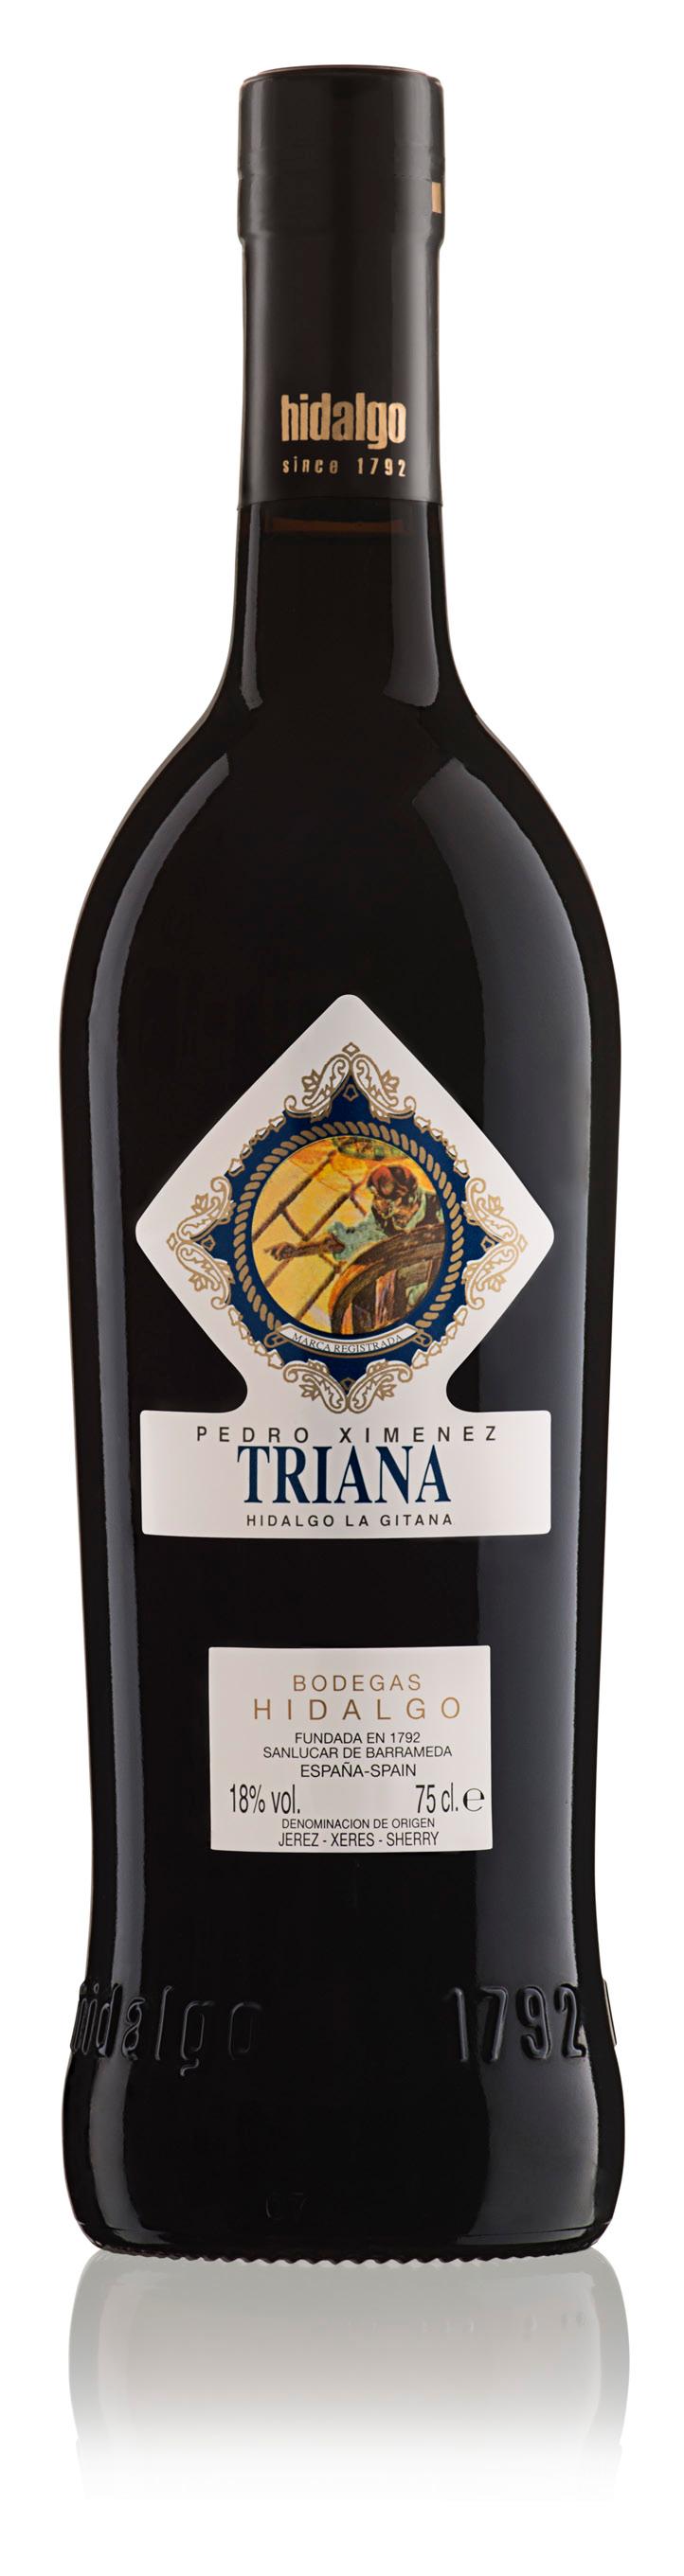 TRIANA PEDRO XIMENEZ D.O. Jerez-Xérès-Sherry 91 WS Bodegas Hidalgo la Gitana was founded in 1792 and since then the company has passed from father to son.